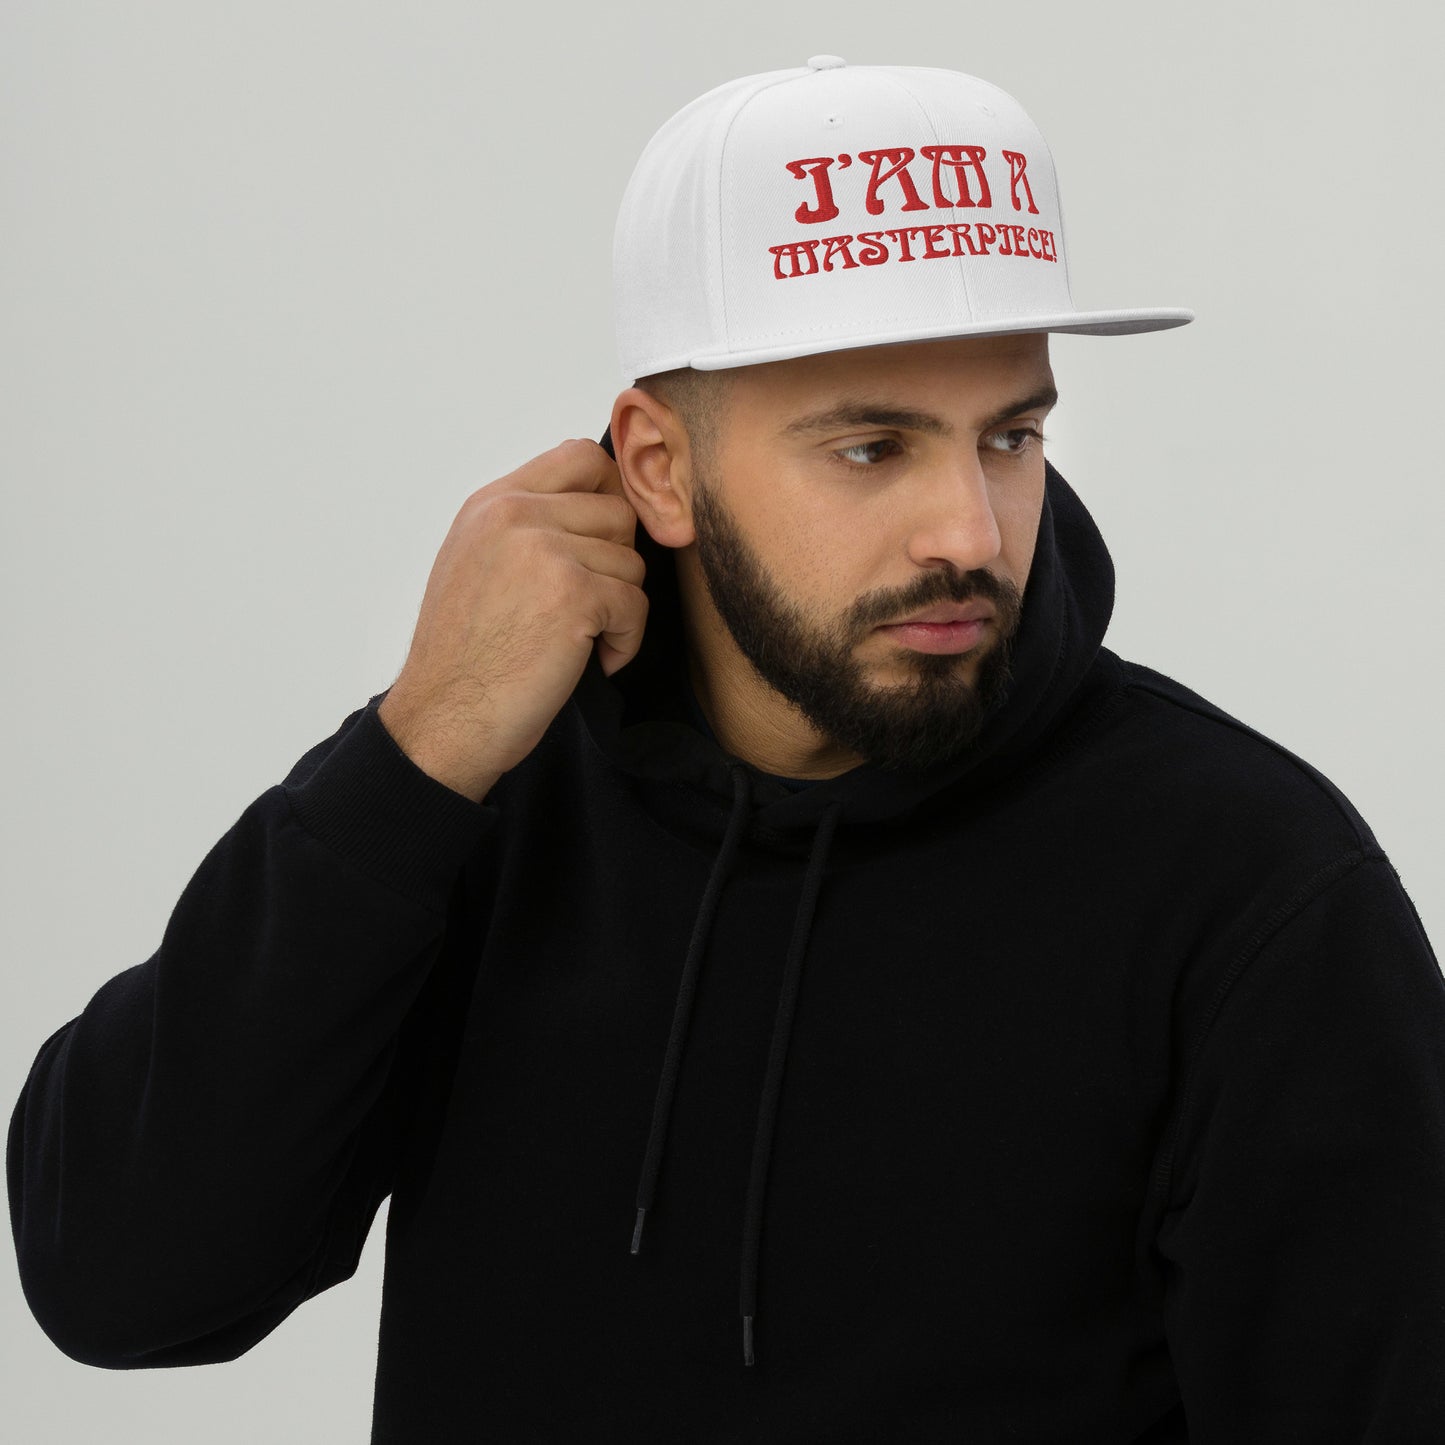 “I’AM A MASTERPIECE!"Snapback Hat W/Red Font